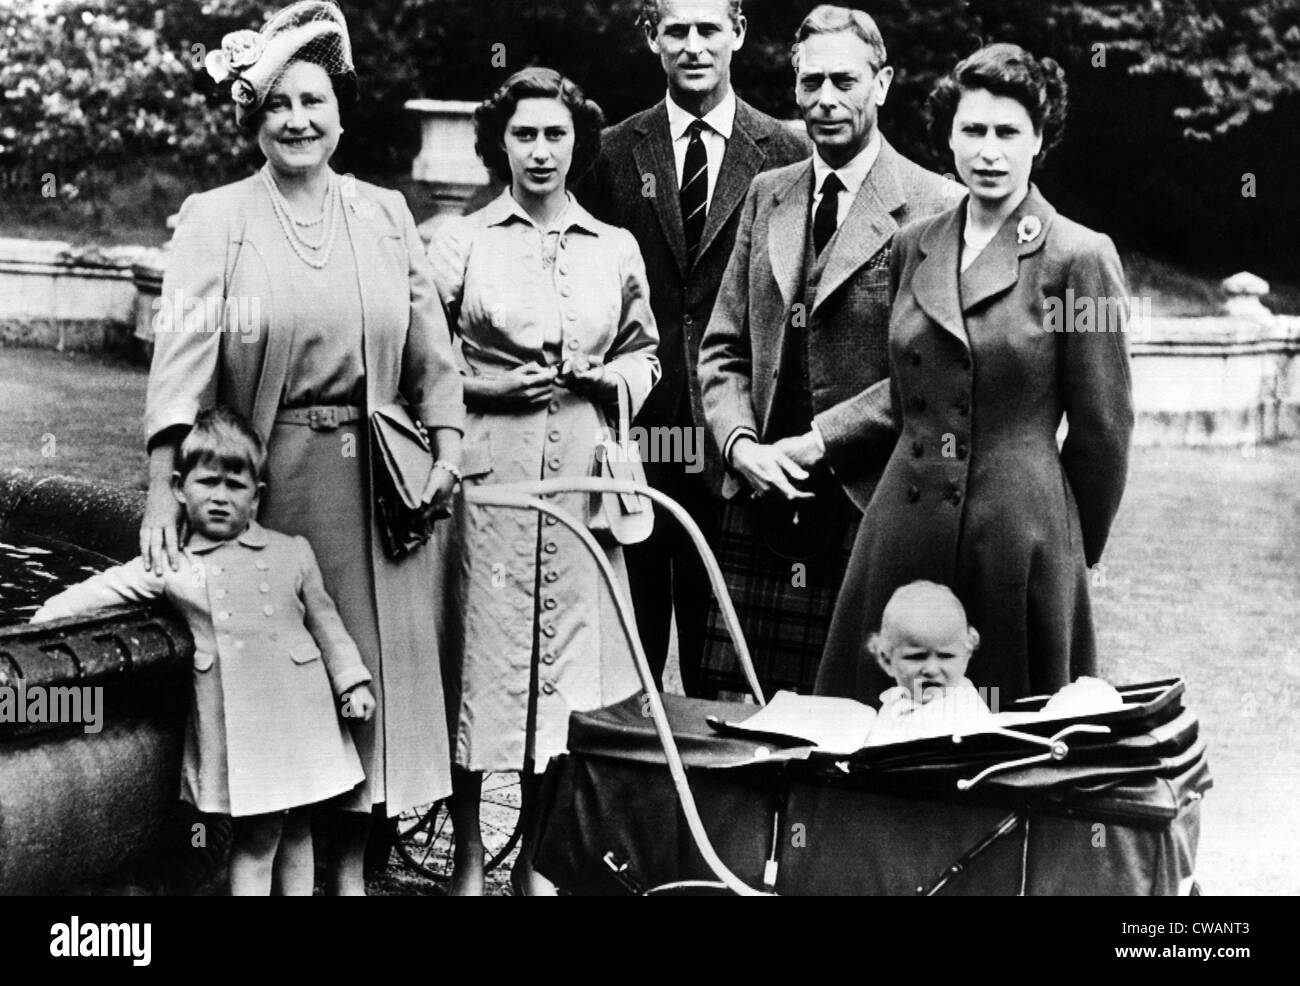 The Royal Family, L-R: Prince Charles, Queen Elizabeth (Queen Consort of George VI), Princess Margaret, The Duke of Edinburgh, Stock Photo